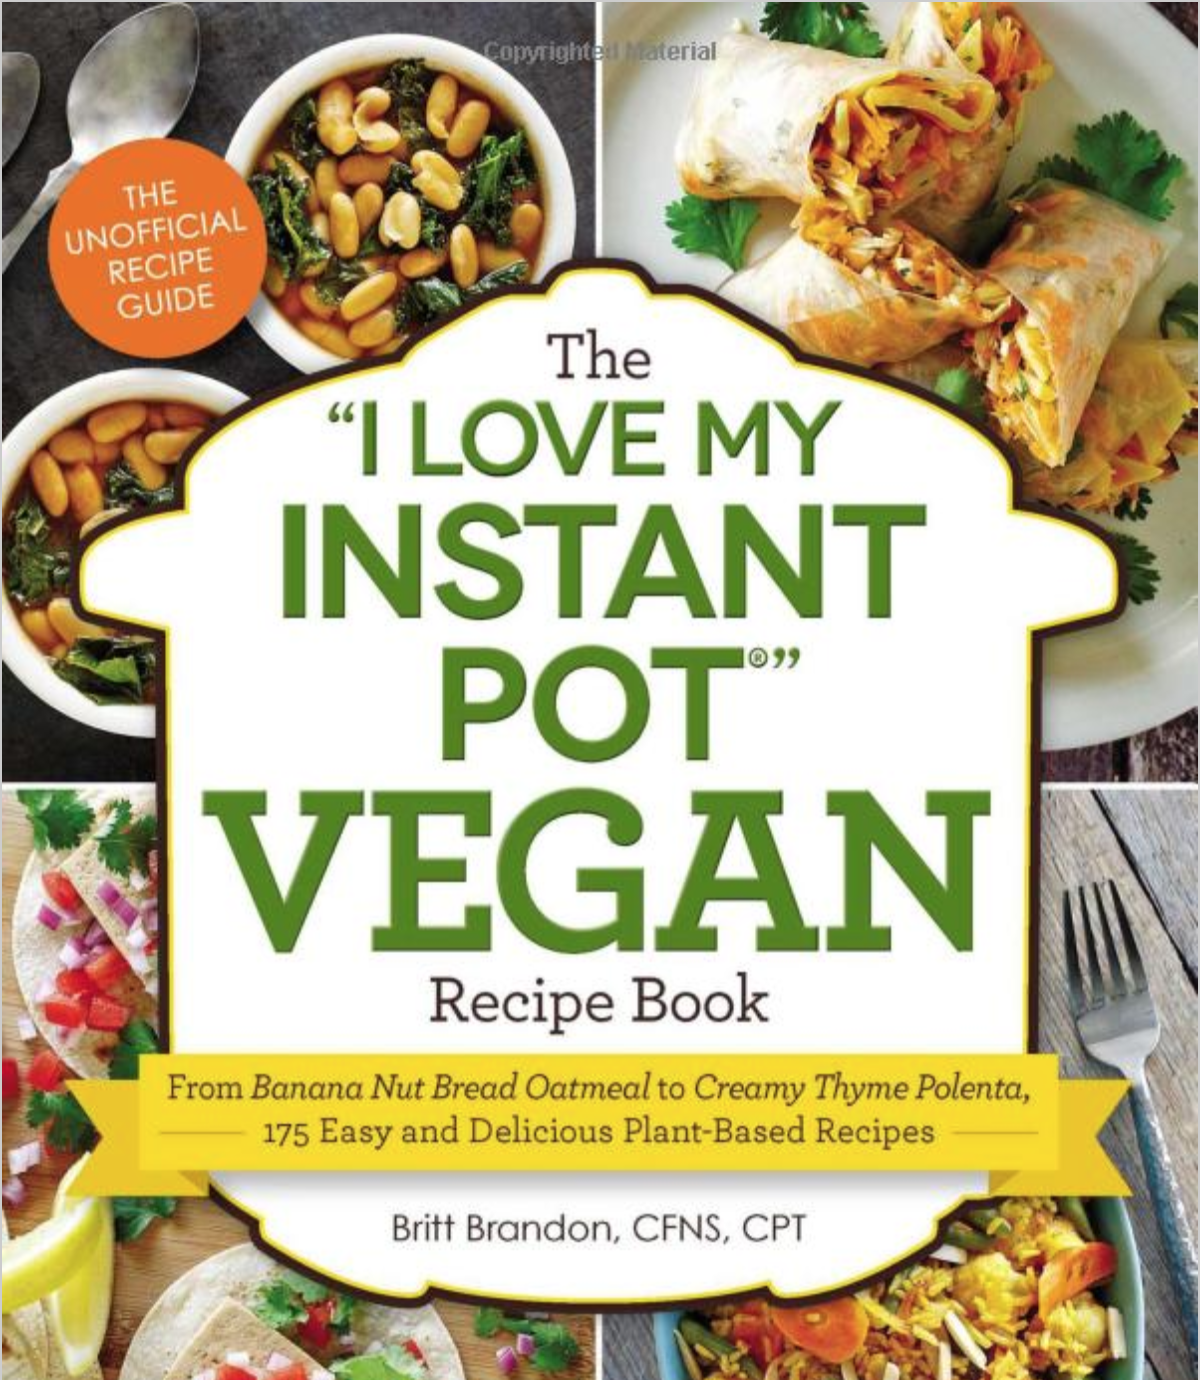 Naked Food Book Club Review | I love my Instant Pot Vegan Recipe Book